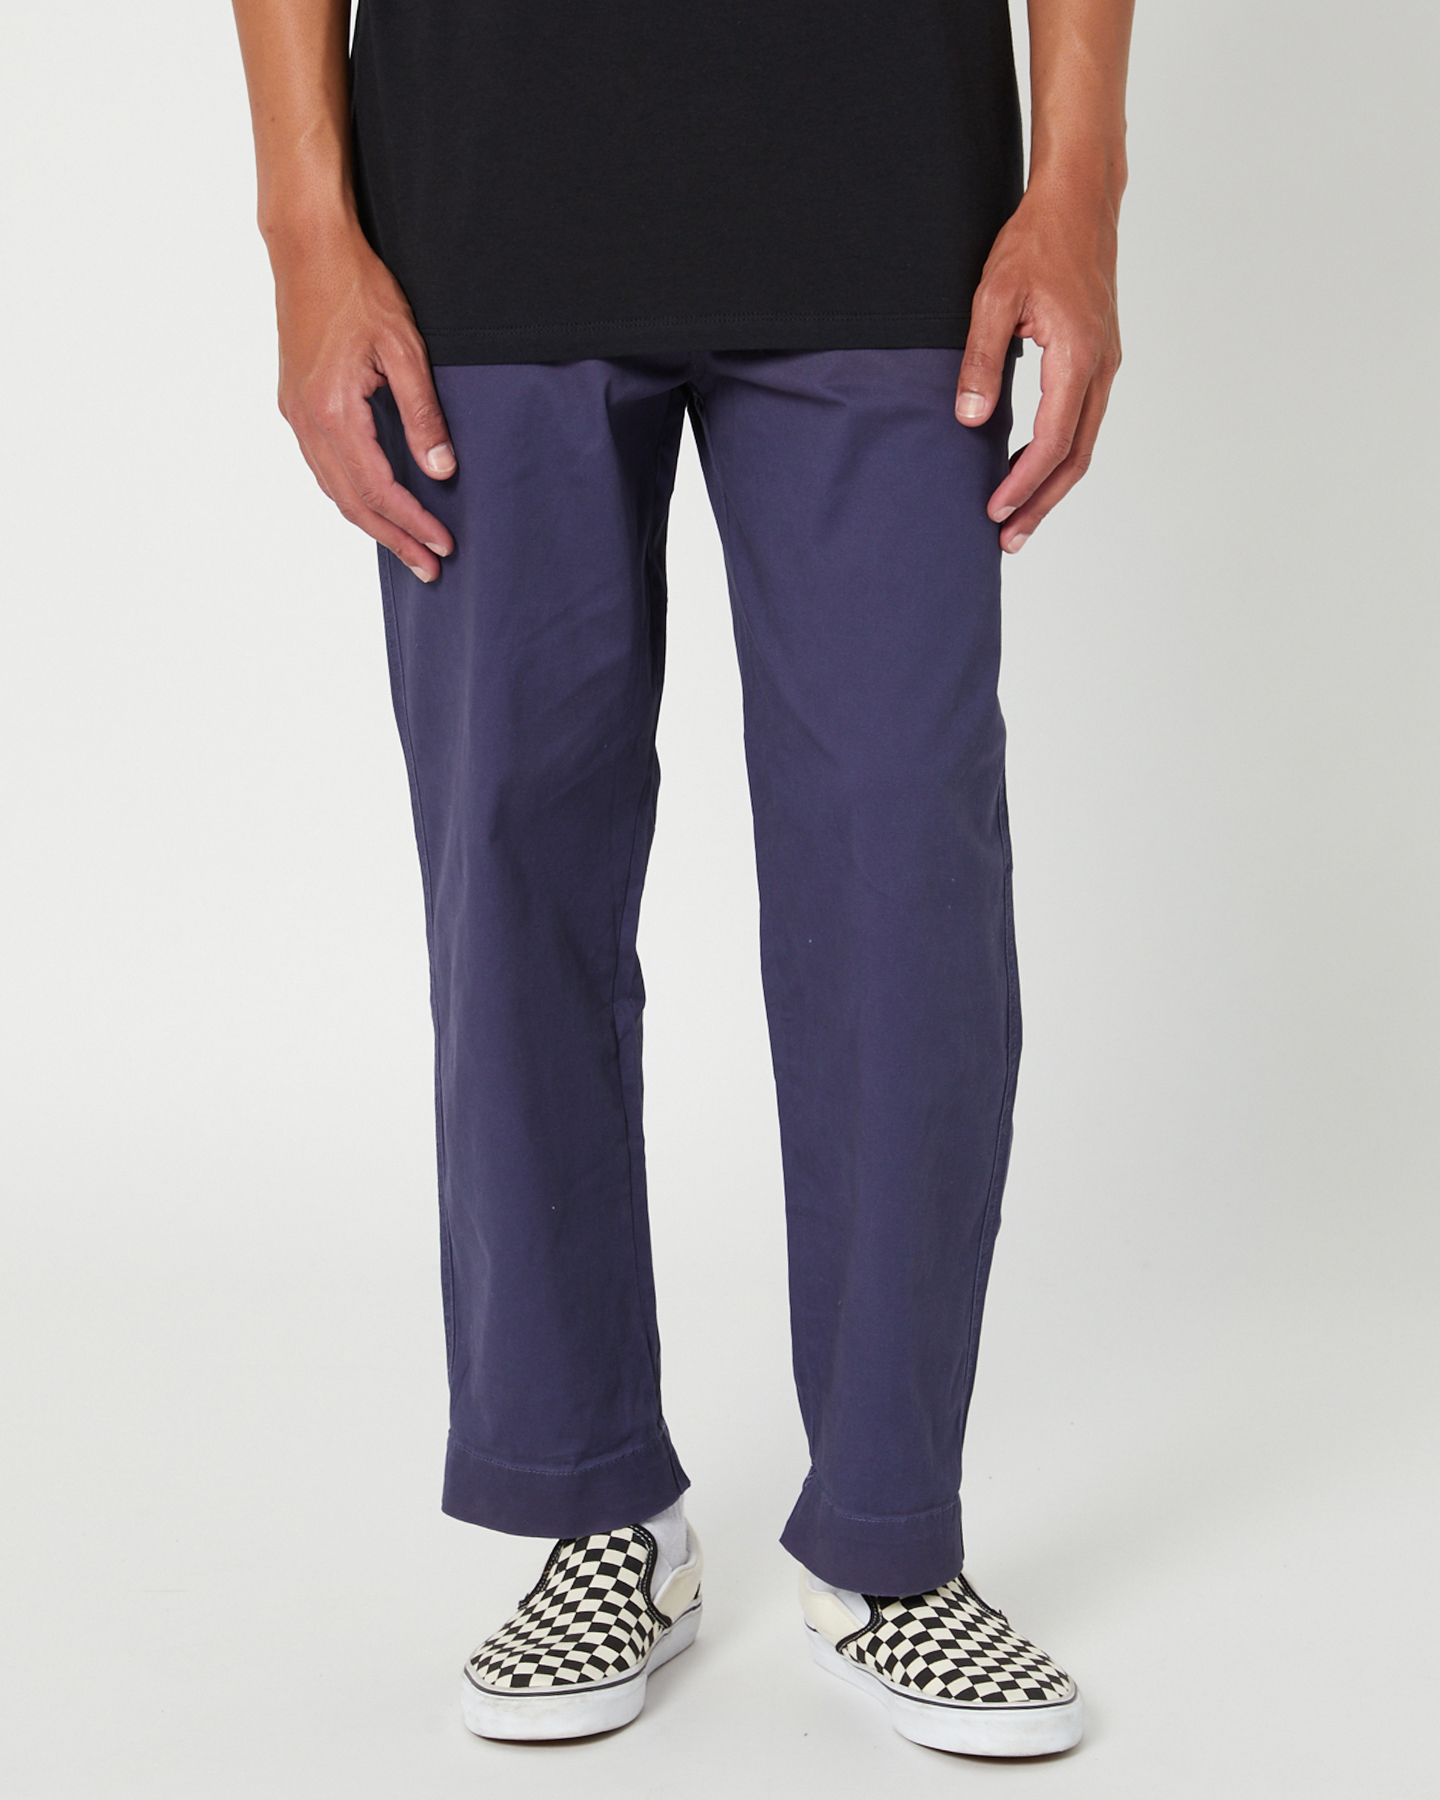 Depactus Danny Chino Pant - Navy Steel | SurfStitch